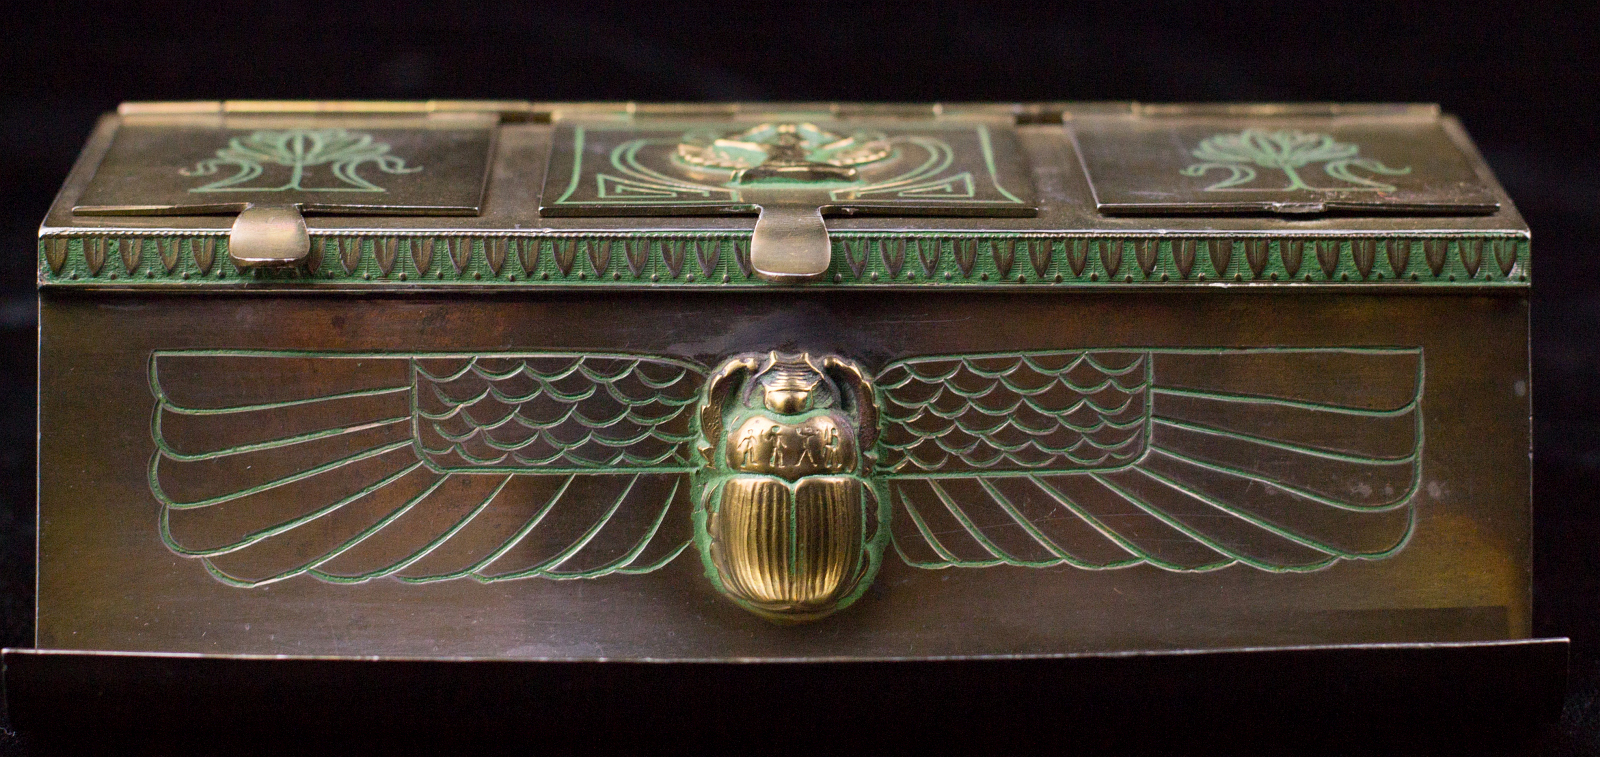 AN ART DECO EGYPTIAN REVIVAL NKWELL STAMP BOX